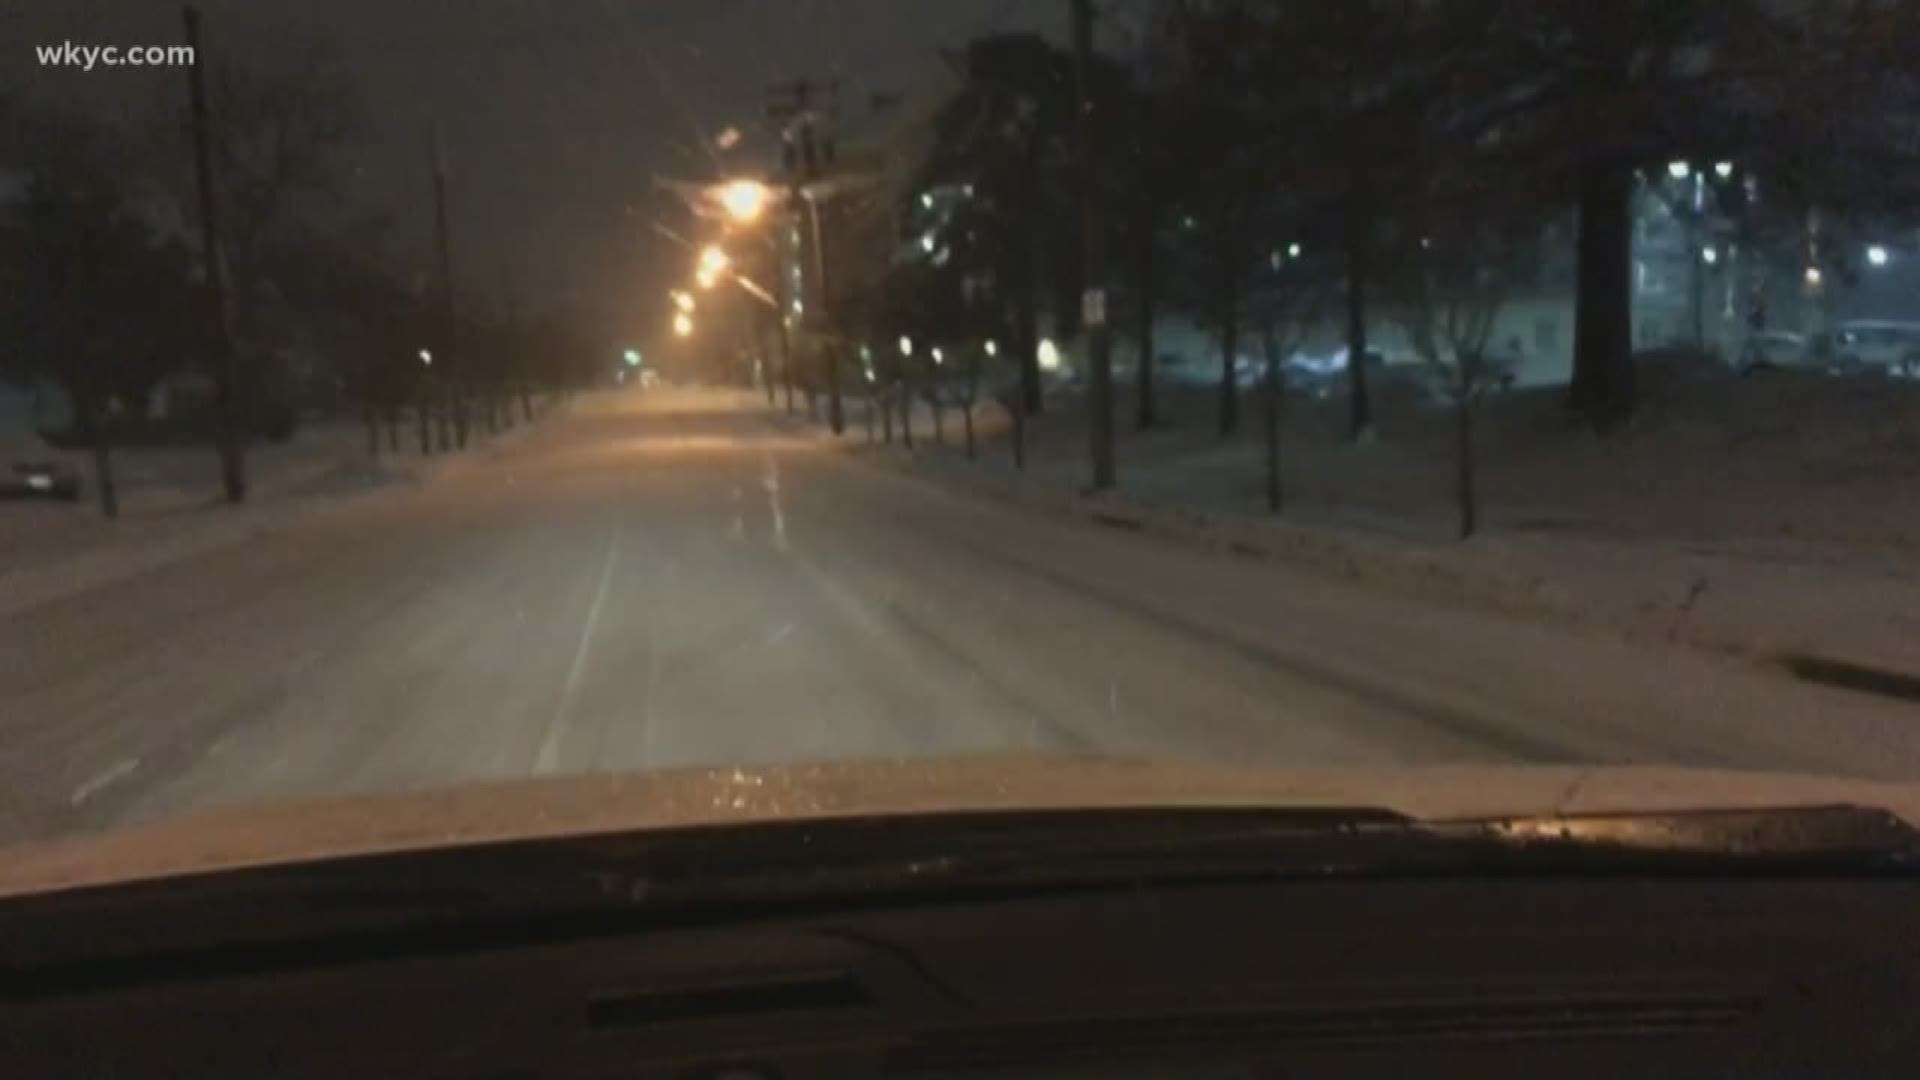 Jan. 24, 2019: It's going to be a slow drive this morning as snow is sticking to the roads. Here's a peek around 5:30 a.m. at the conditions in Akron with WKYC's Jasmine Monroe.